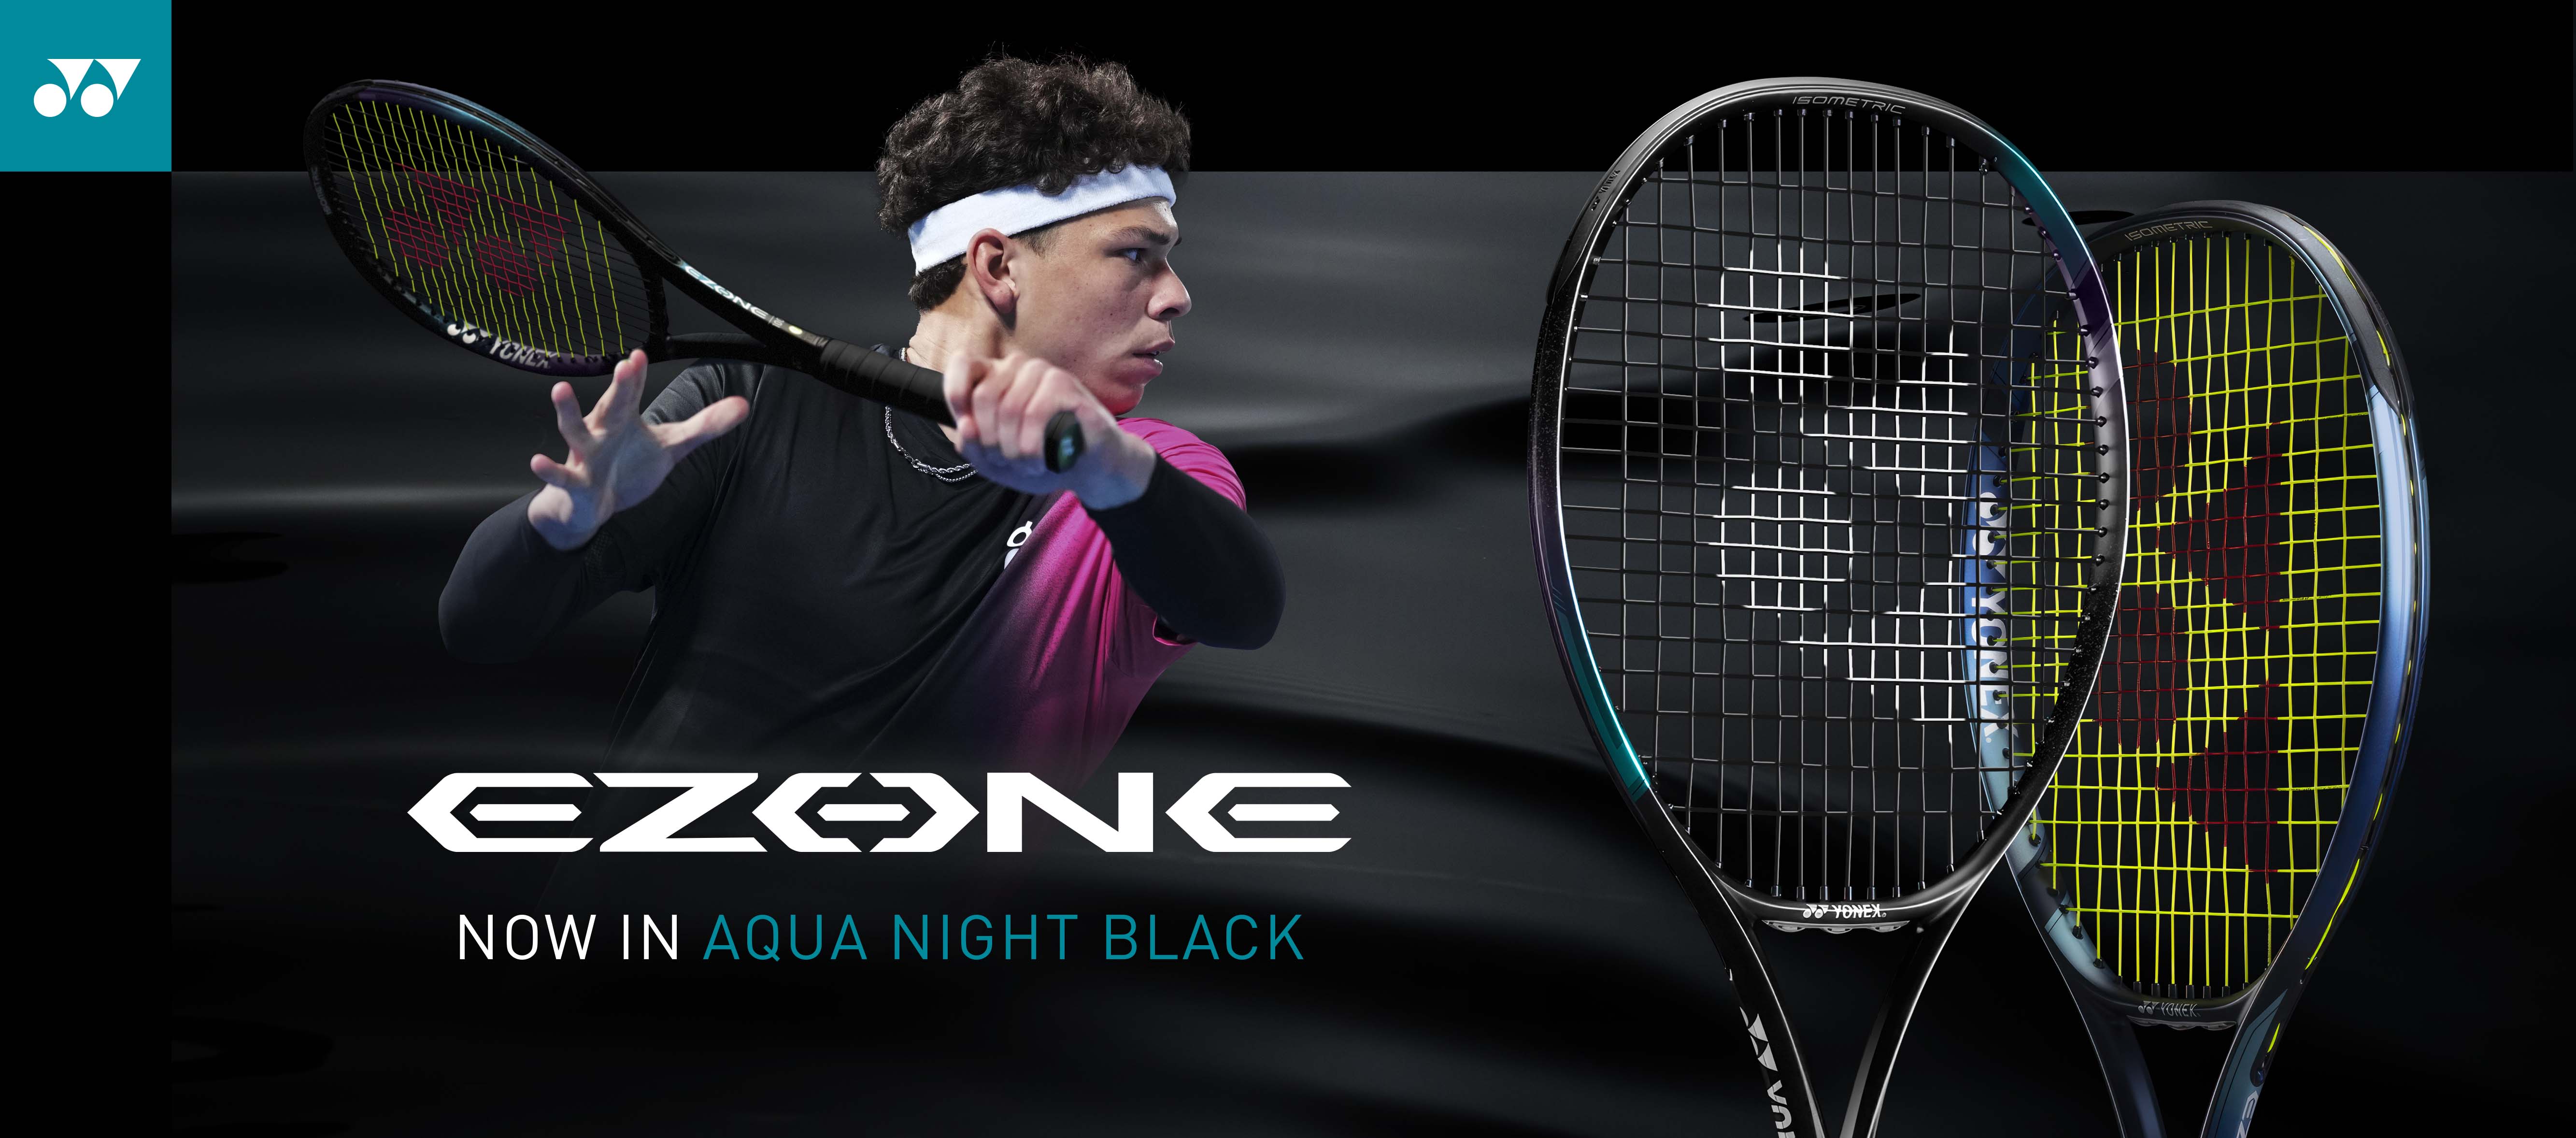 eZone 98 Tennis Racquet in Black - Player holding